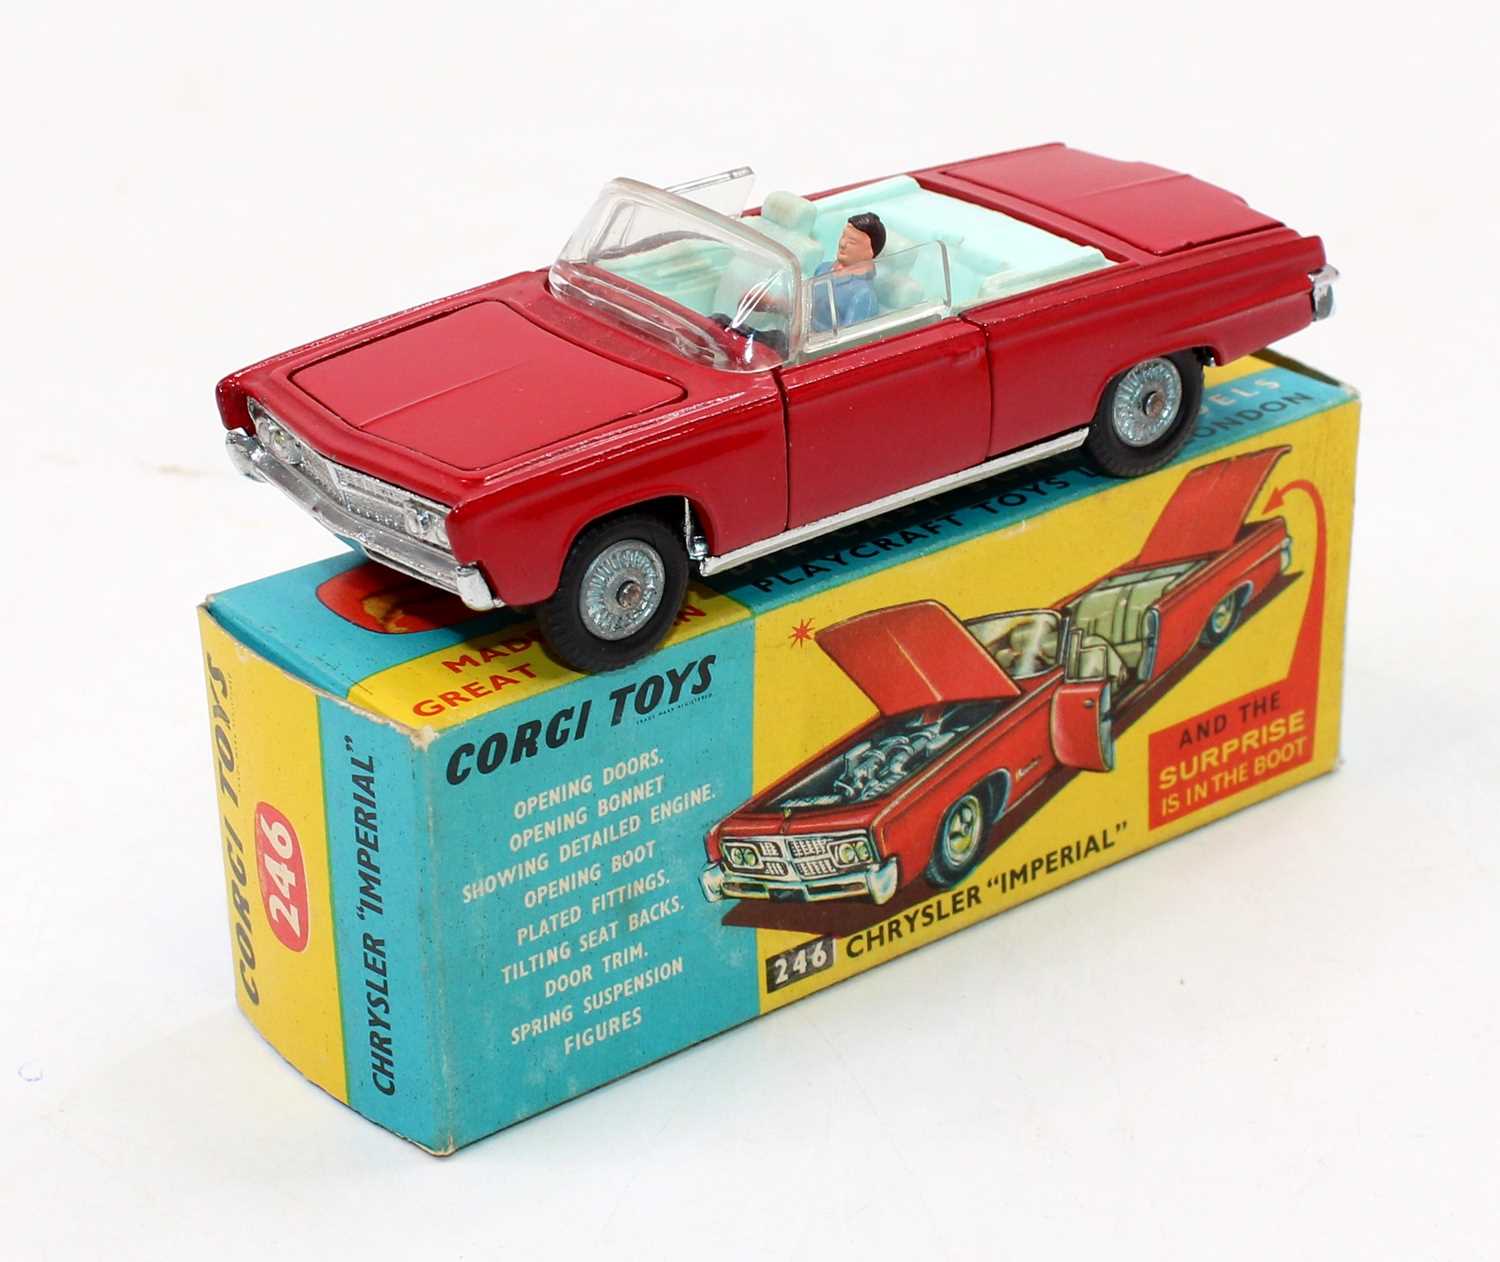 Corgi Toys, 246 Chrysler Imperial convertible, deep red body with light blue interior, with driver